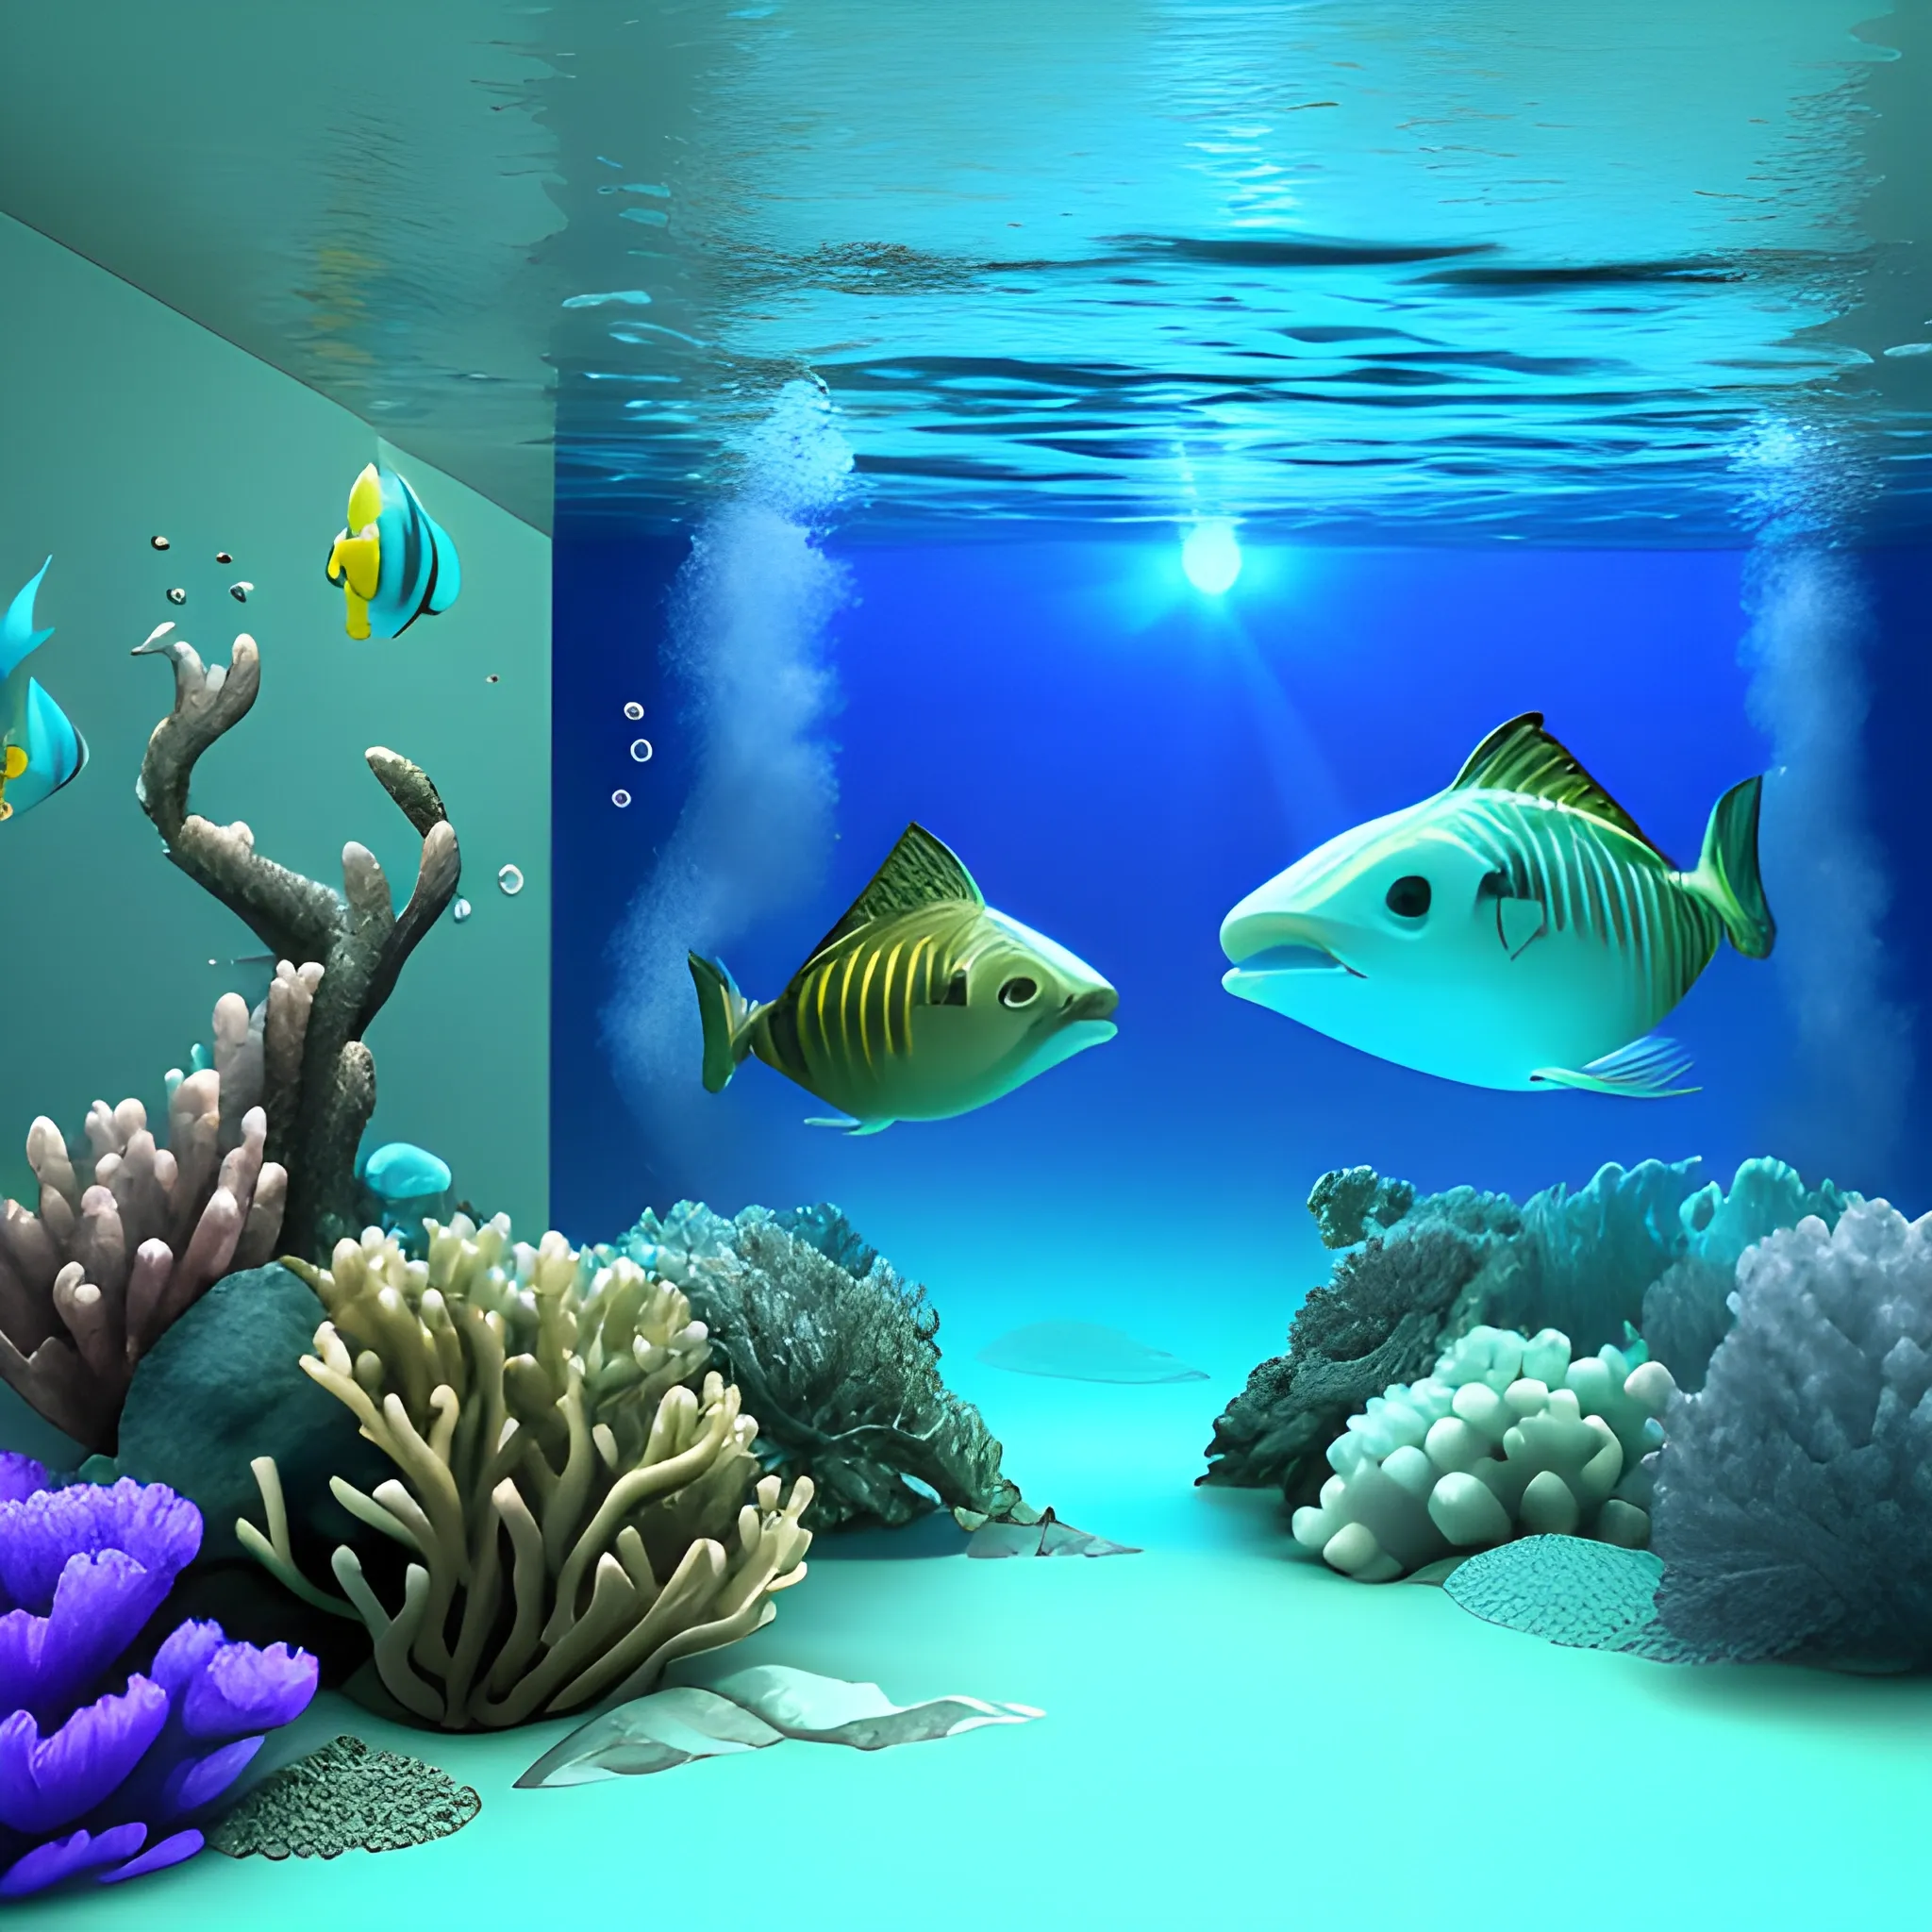 3D, underwater, can